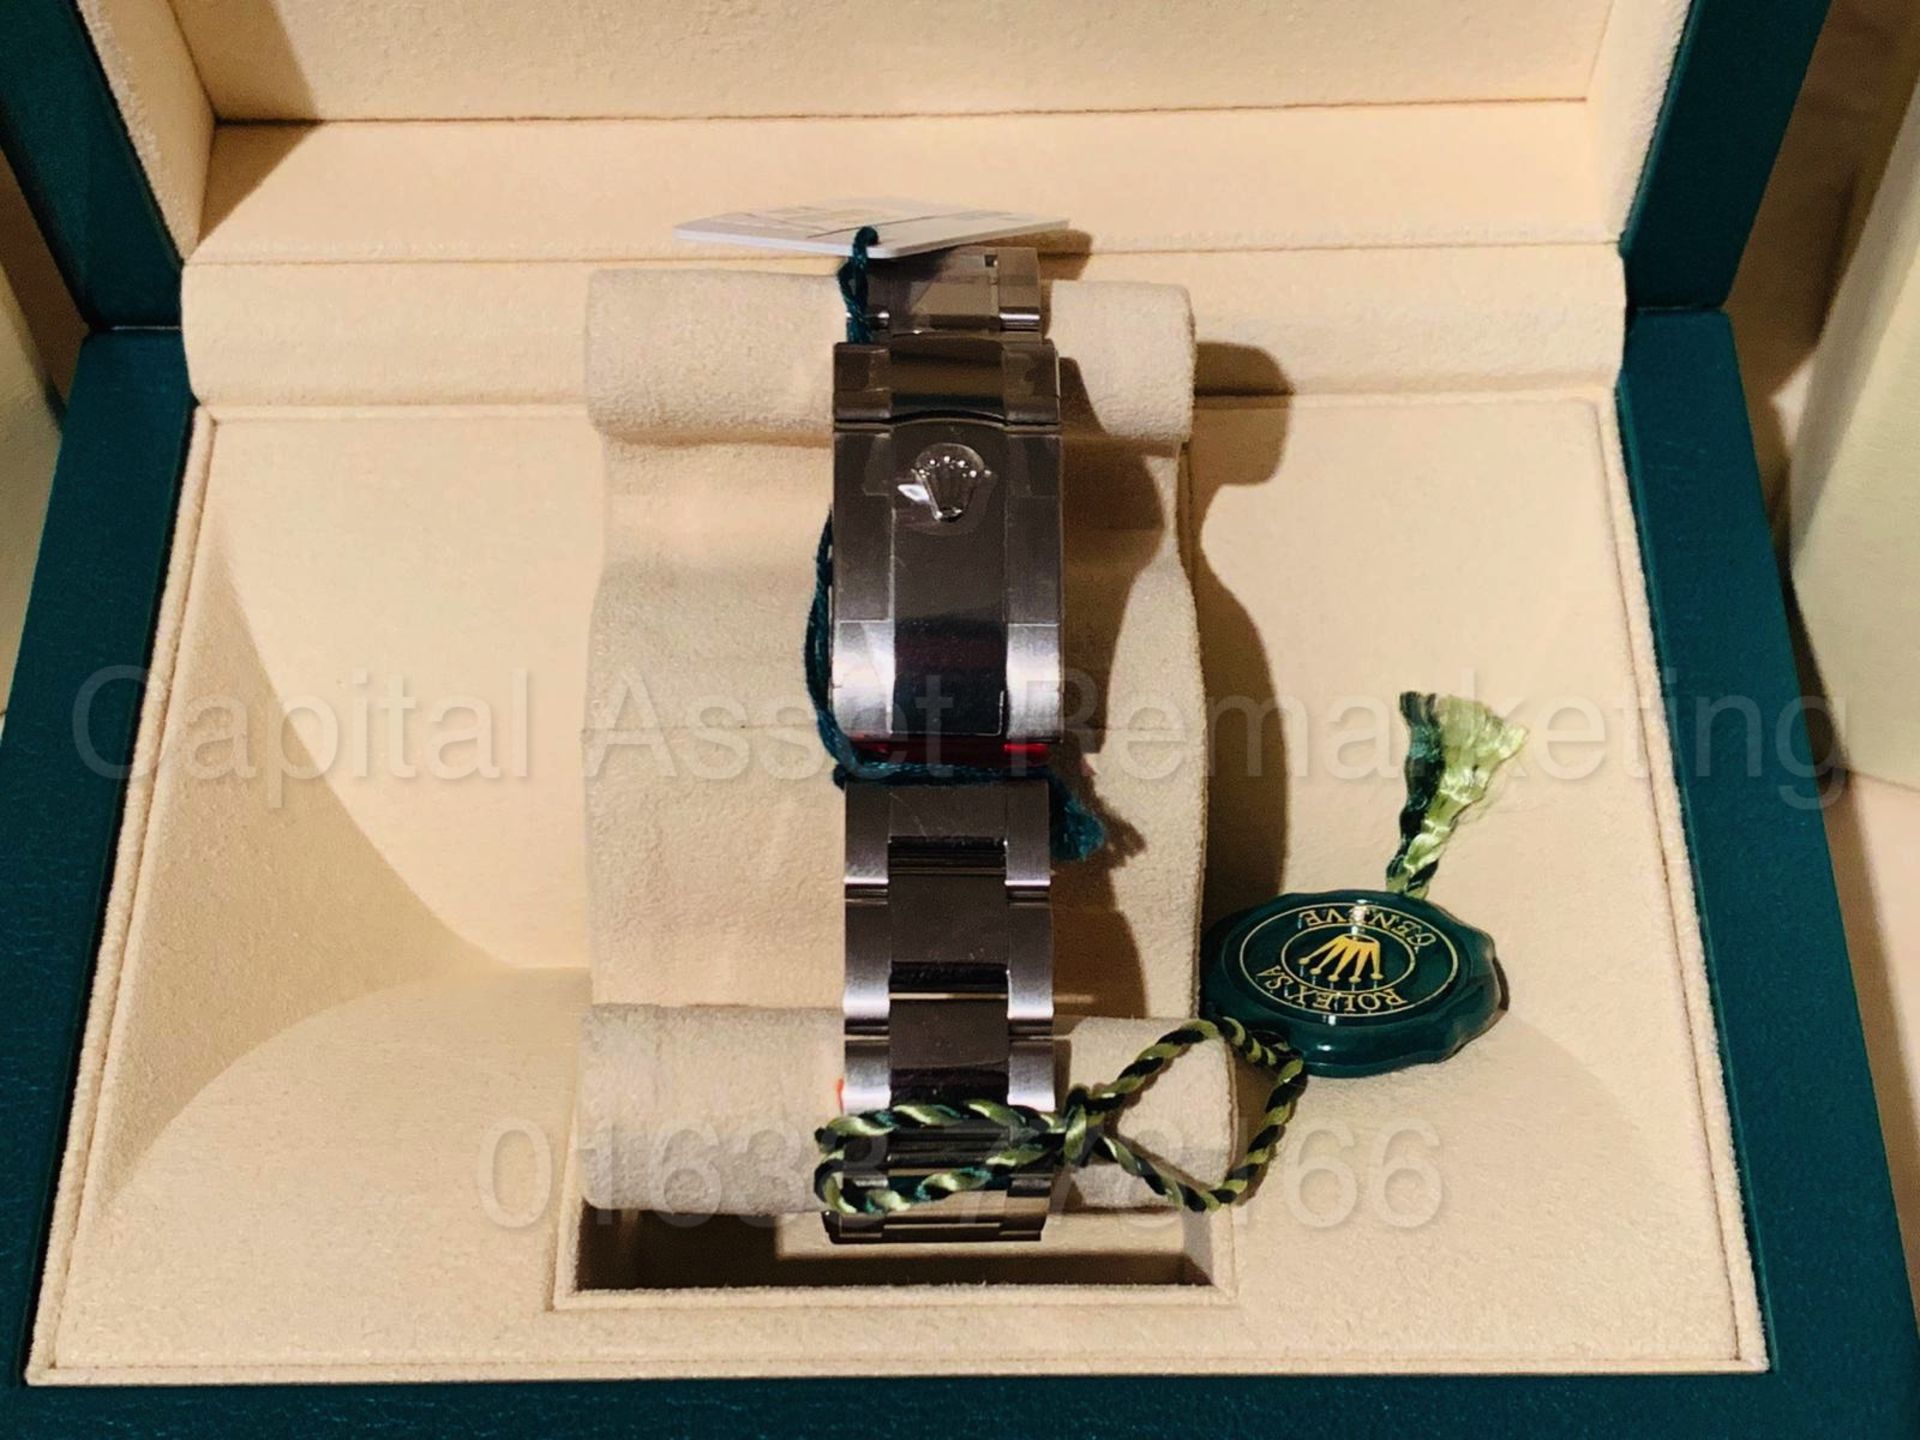 ROLEX OYSTER PERPETUAL *41MM DATEJUST* (BRAND NEW / UN-WORN) *GENUINE* (ALL PAPERWORK & BOX PRESENT) - Image 6 of 10